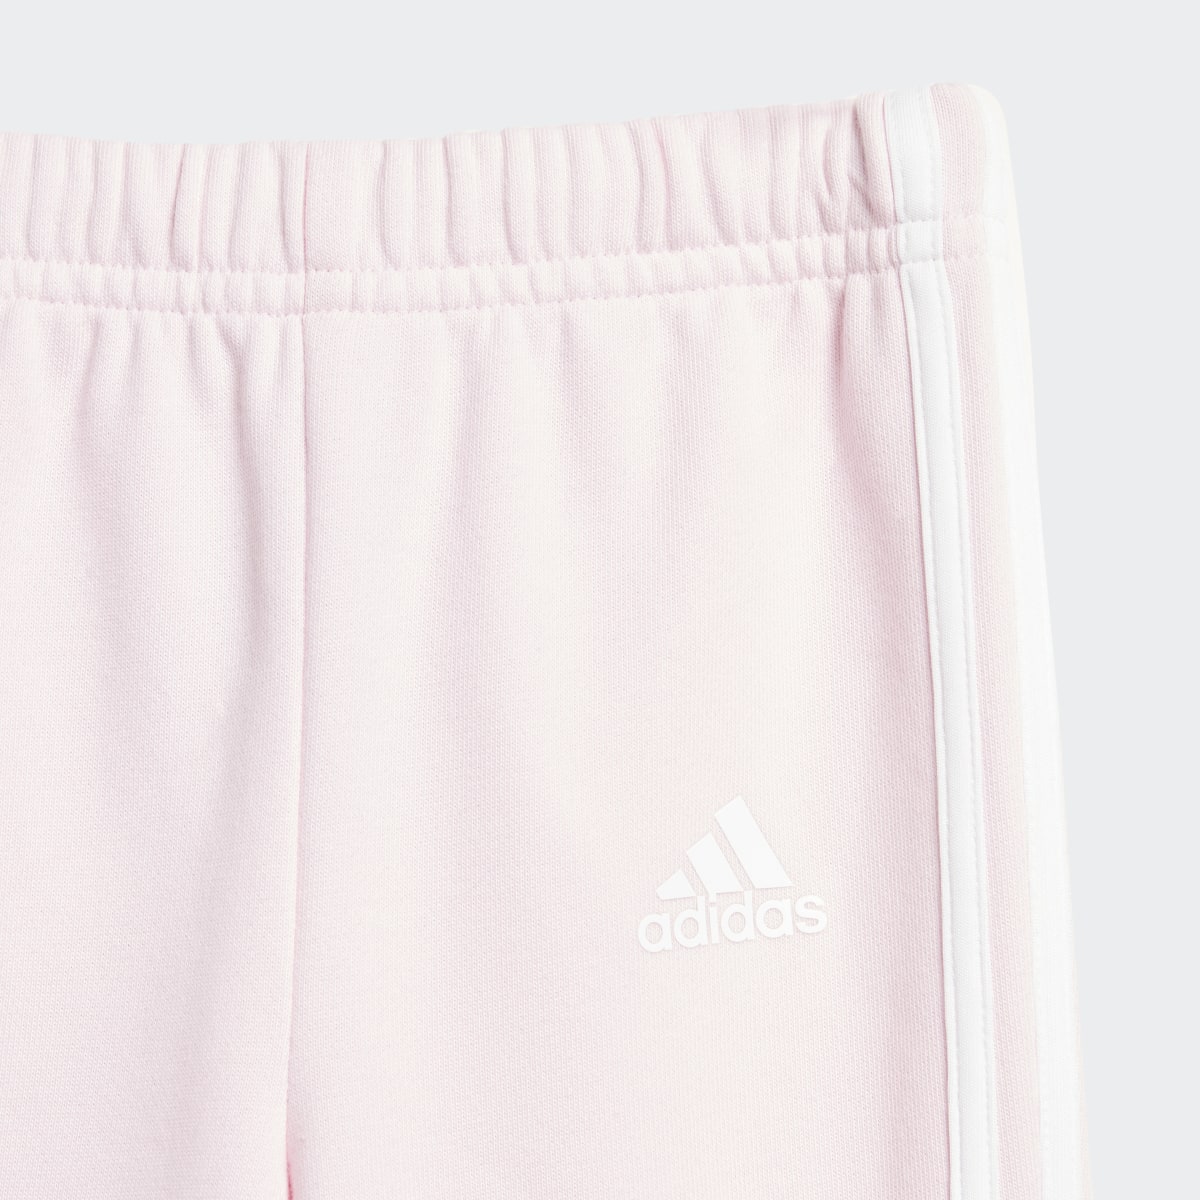 Adidas Badge of Sport French Terry Jogger. 9